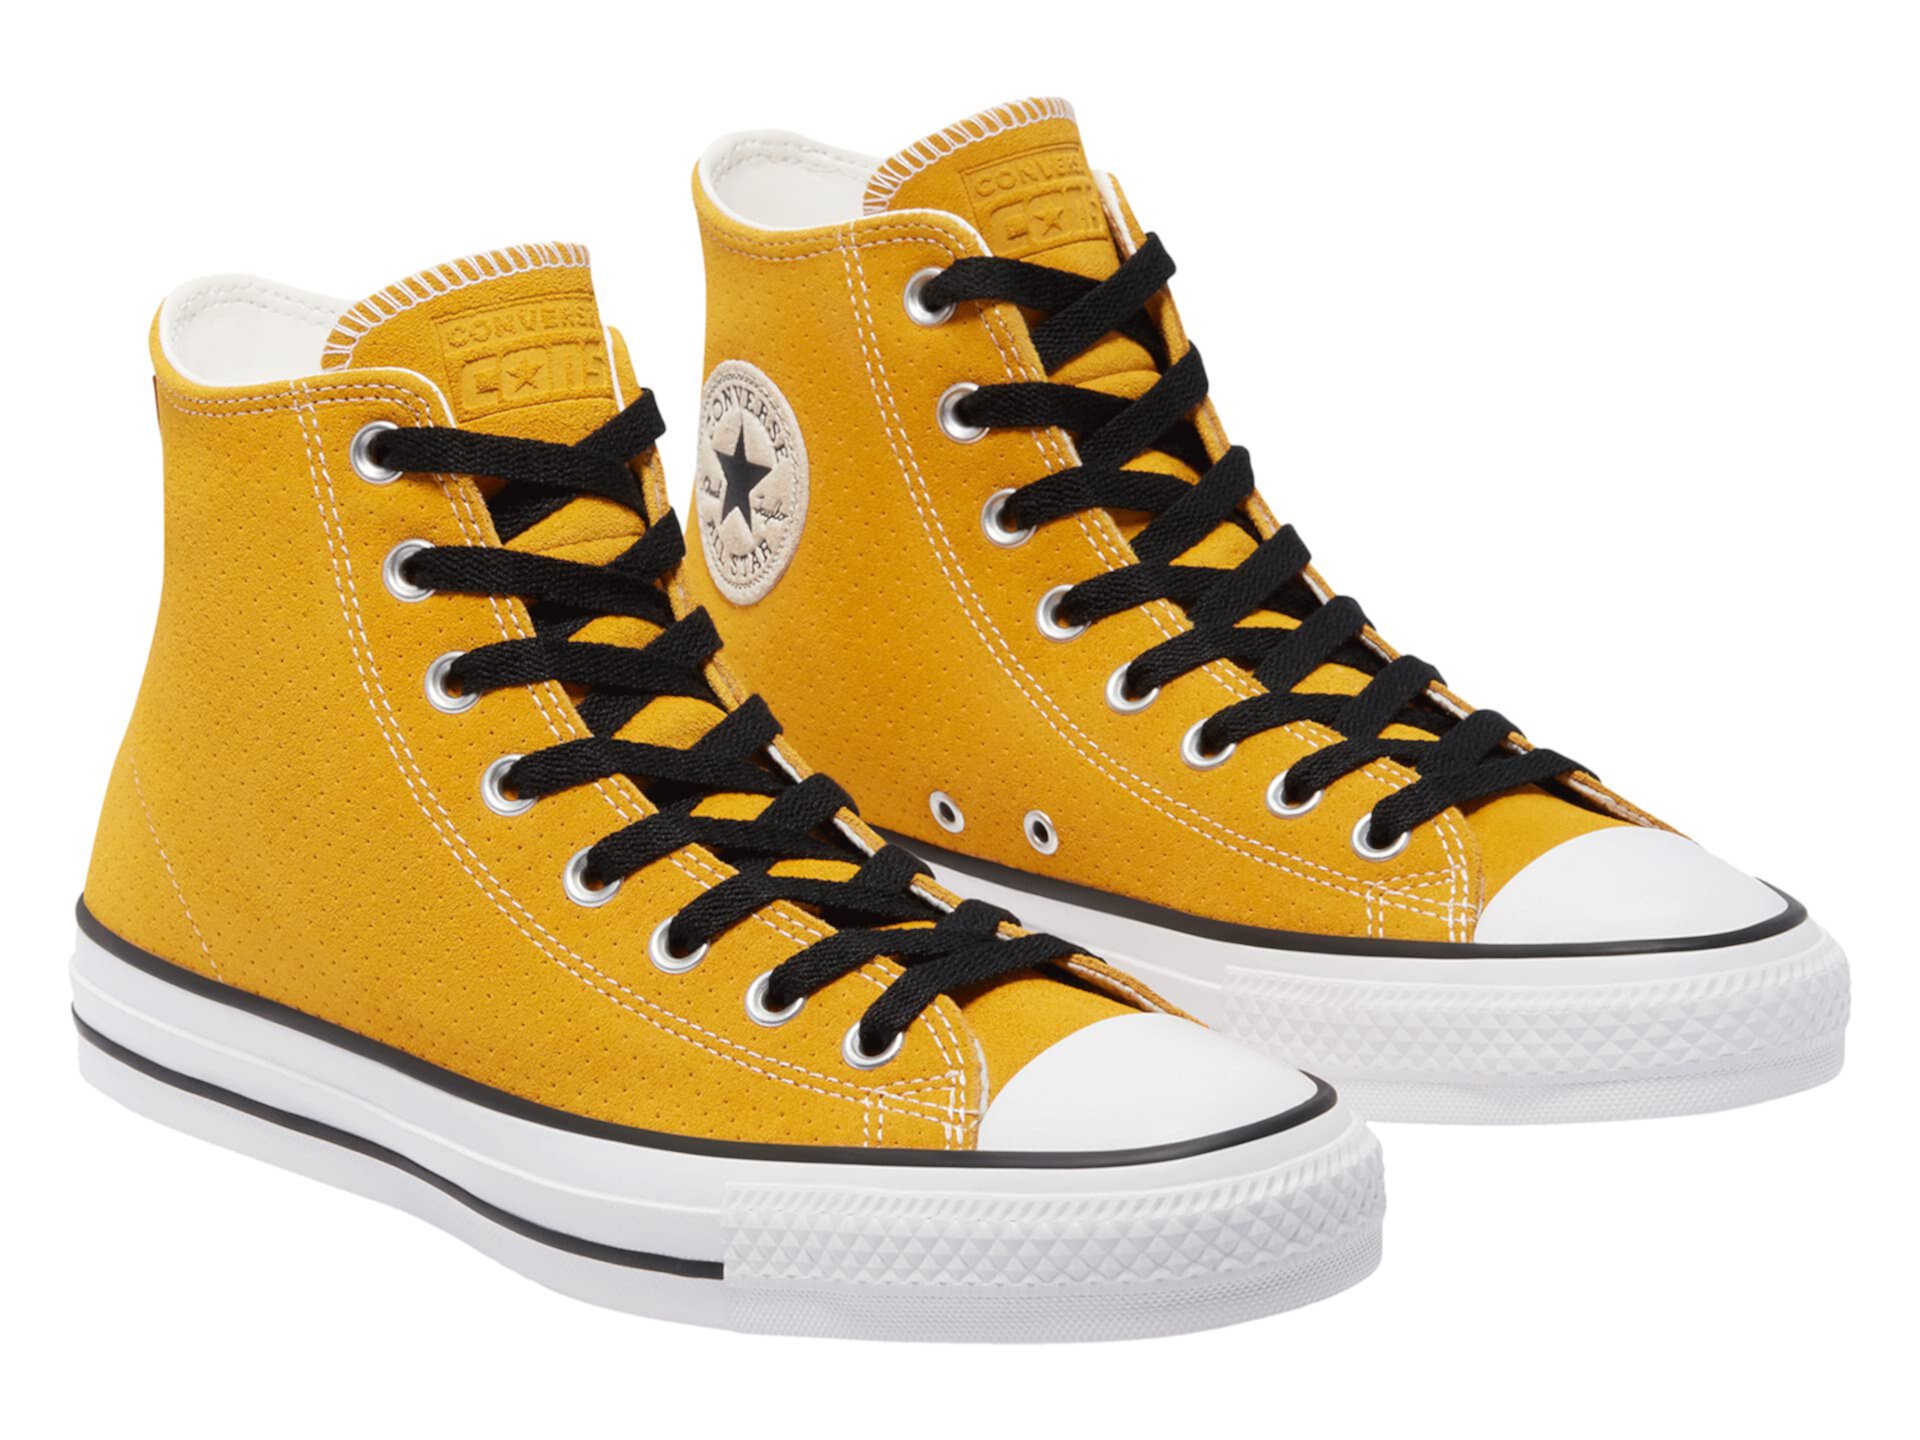 Chuck Taylor All Star Pro Suede Perf Suede - Привет Converse Skate